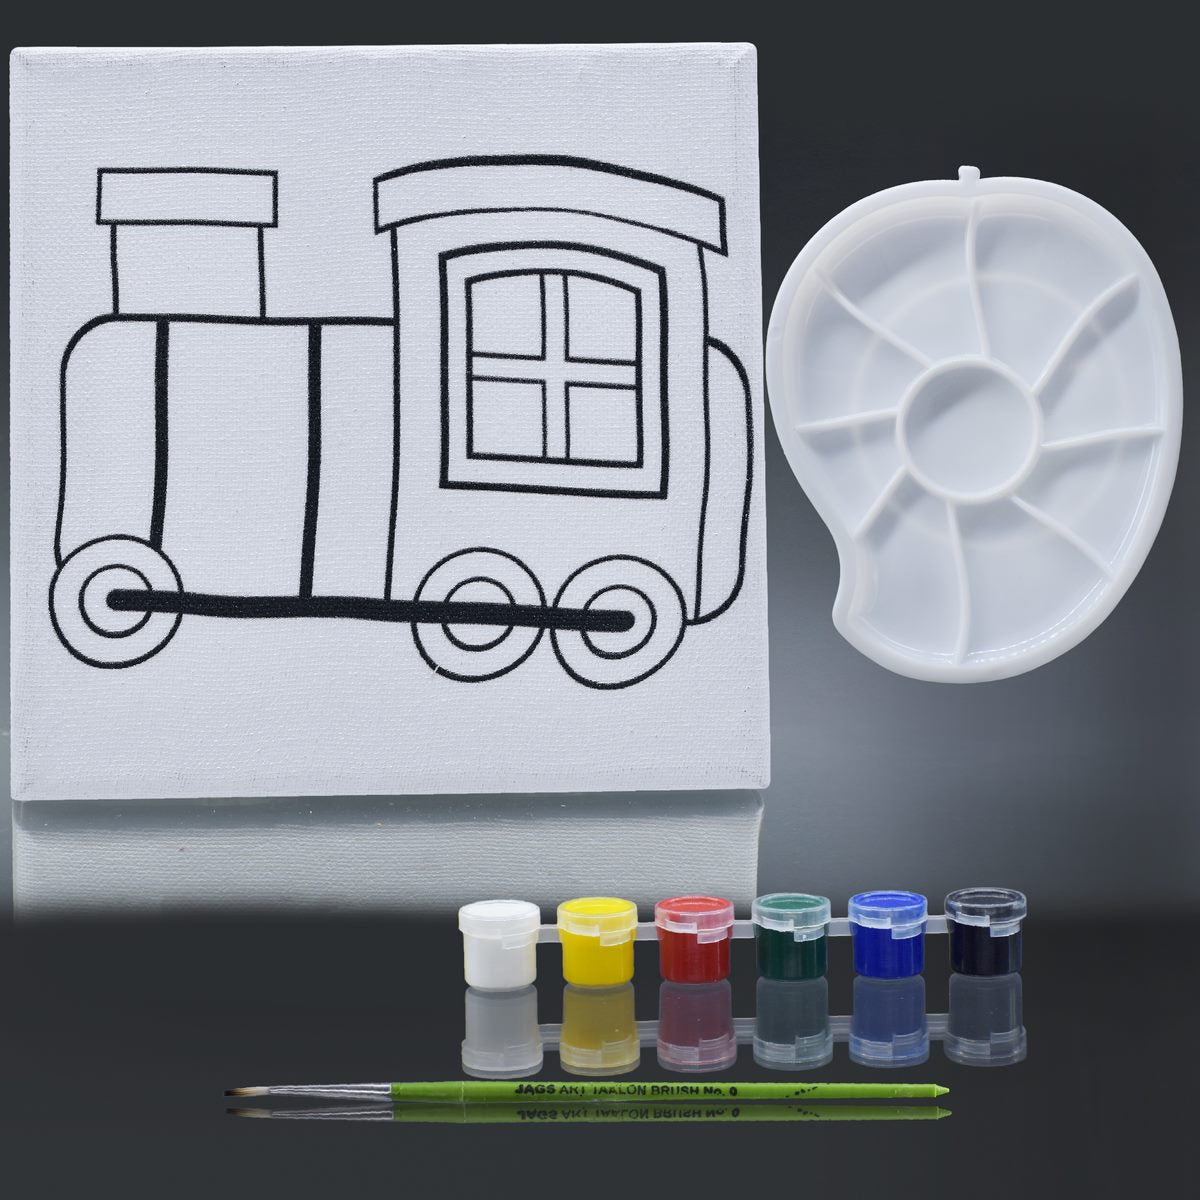 jags-mumbai Canvas DIY Painting Kit: Stretched Canvas with Pre-drawn Pictures and Free Colors